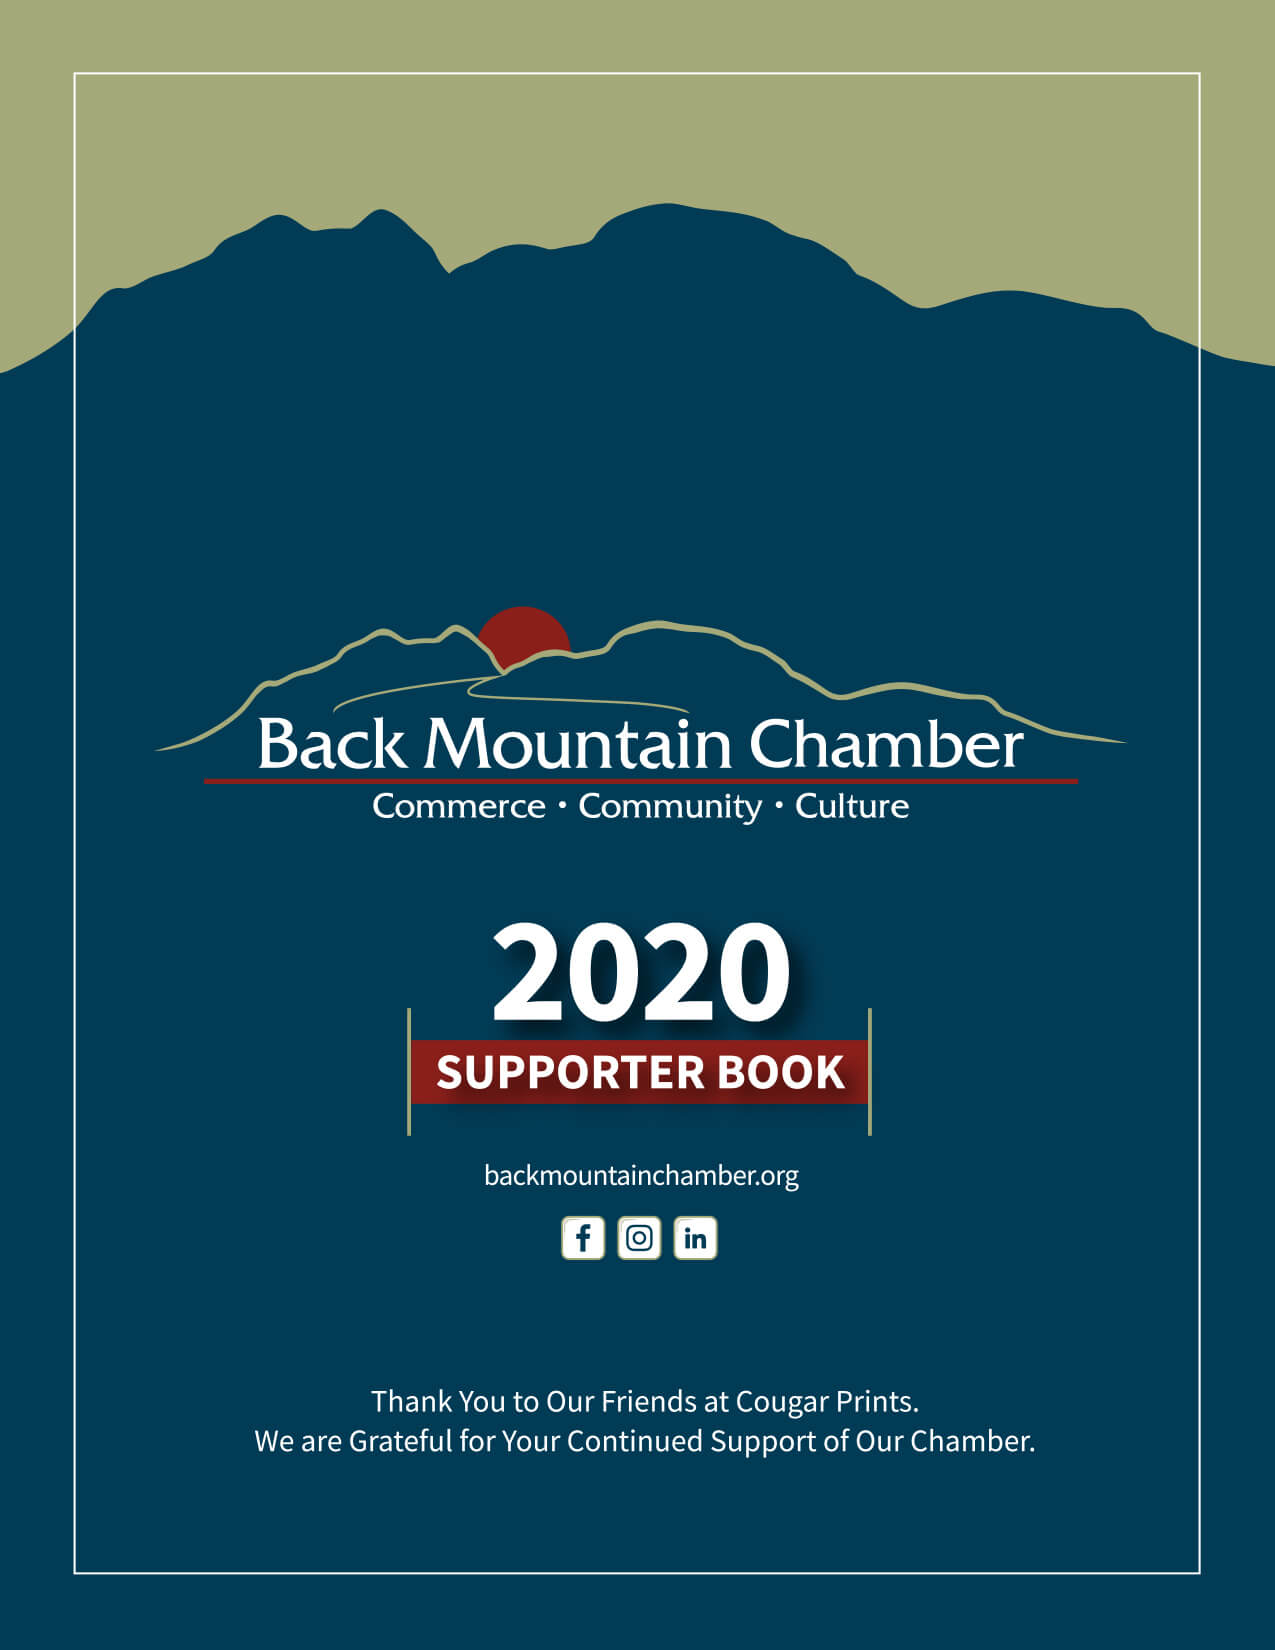 View our 2020 supporter book